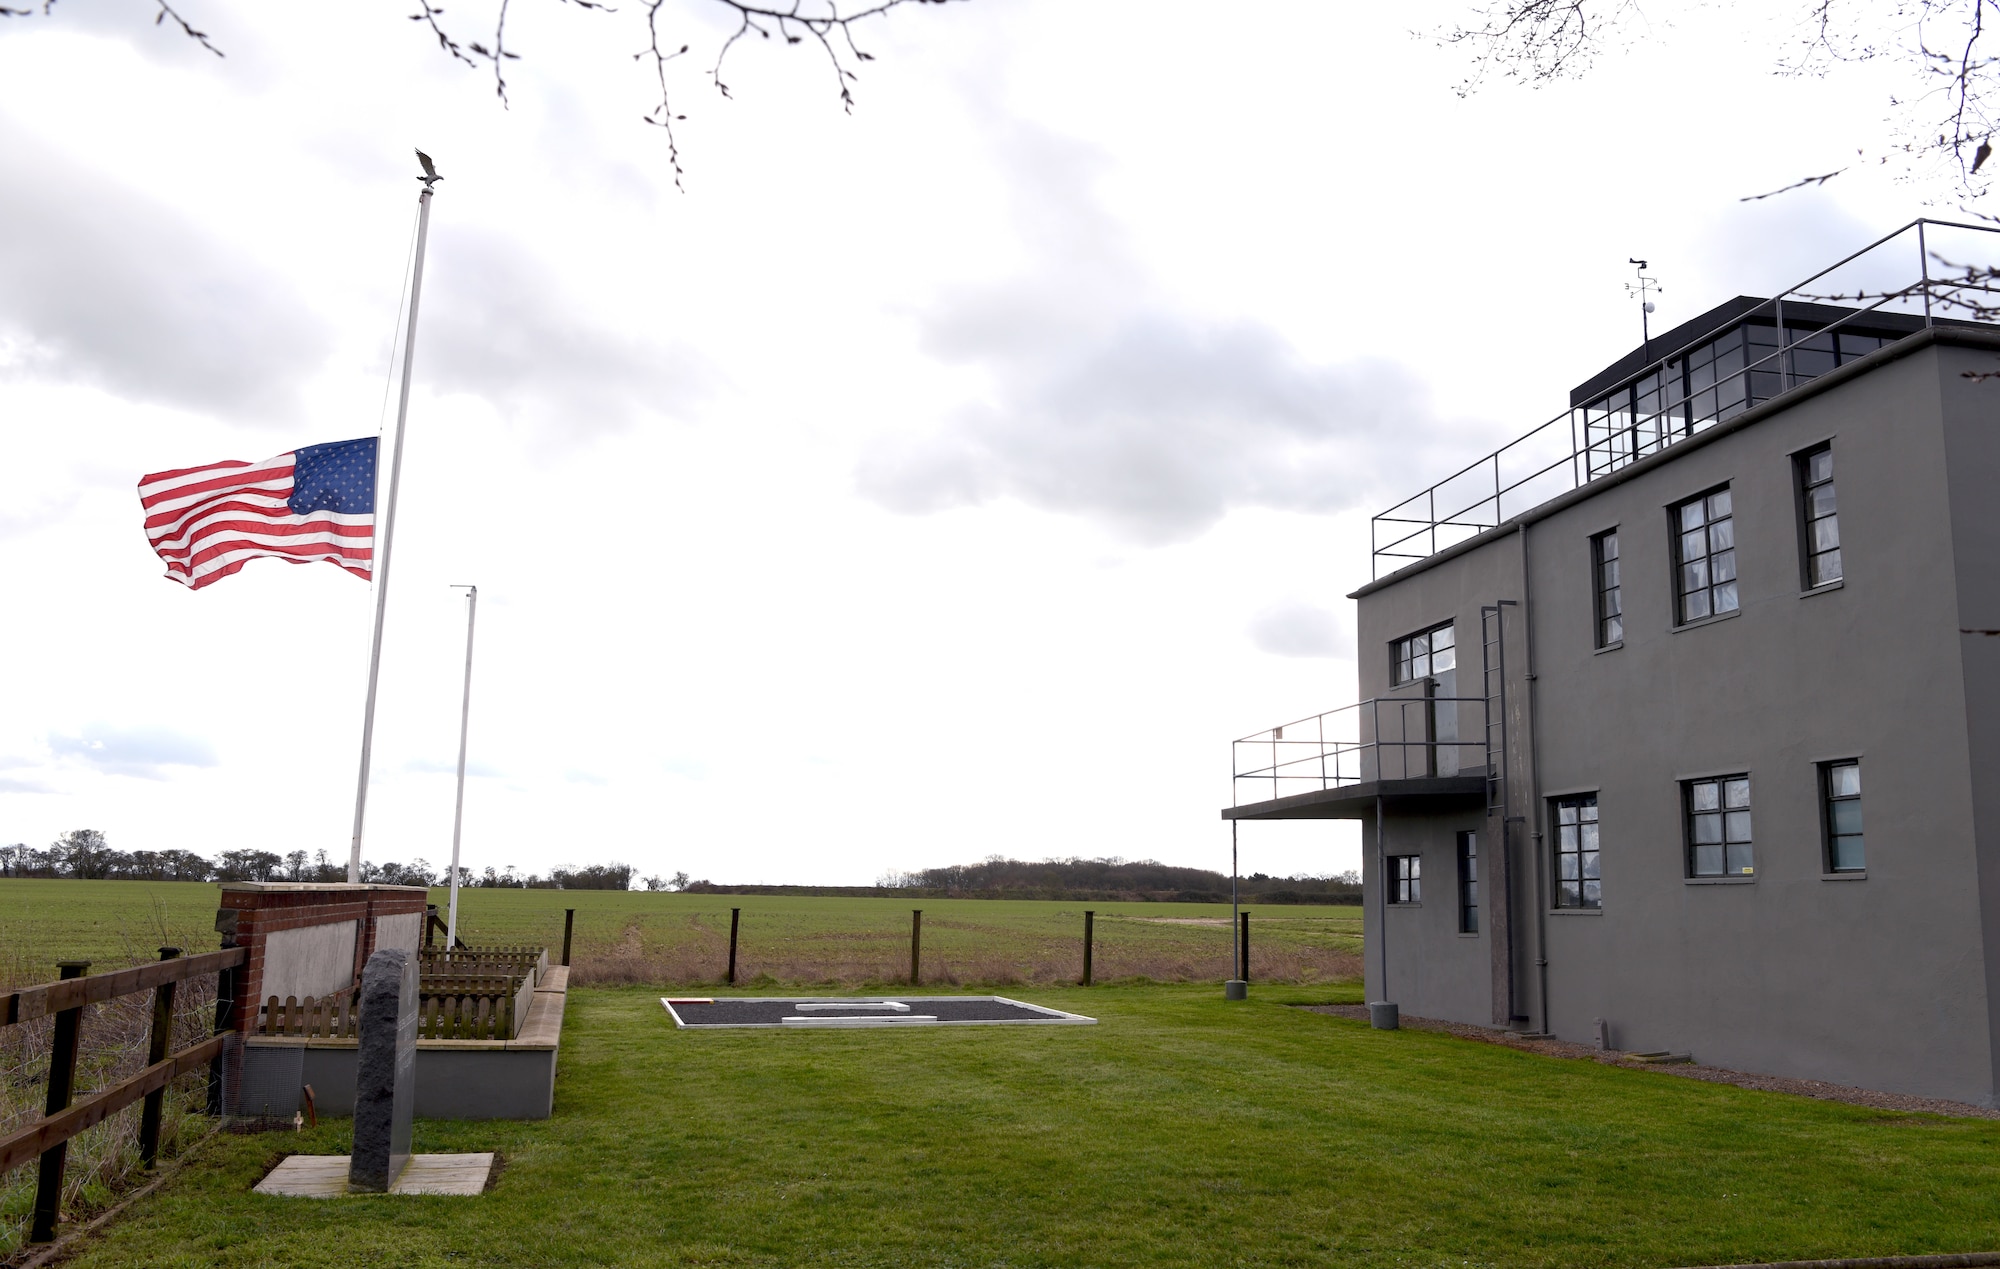 The Stars and Stripes flag flies at half staff at the 100th Bomb Group Memorial Museum, Thorpe Abbotts, England, Feb. 2, 2023, in honor of Staff Sgt. Al Arreola, World War II and 100th BG veteran, who passed away Feb. 1, 2023. Arreola was a 351st Bomb Squadron ball turret gunner based at Thorpe Abbotts during World War II and completed 35 missions during his time there. Airmen from today’s 351st Air Refueling Squadron performed a heritage patching ceremony at the former home of the 100th BG, and remembered the veteran and the legacy he and other World War II veterans have left behind. (U.S. Air Force photo by Karen Abeyasekere)